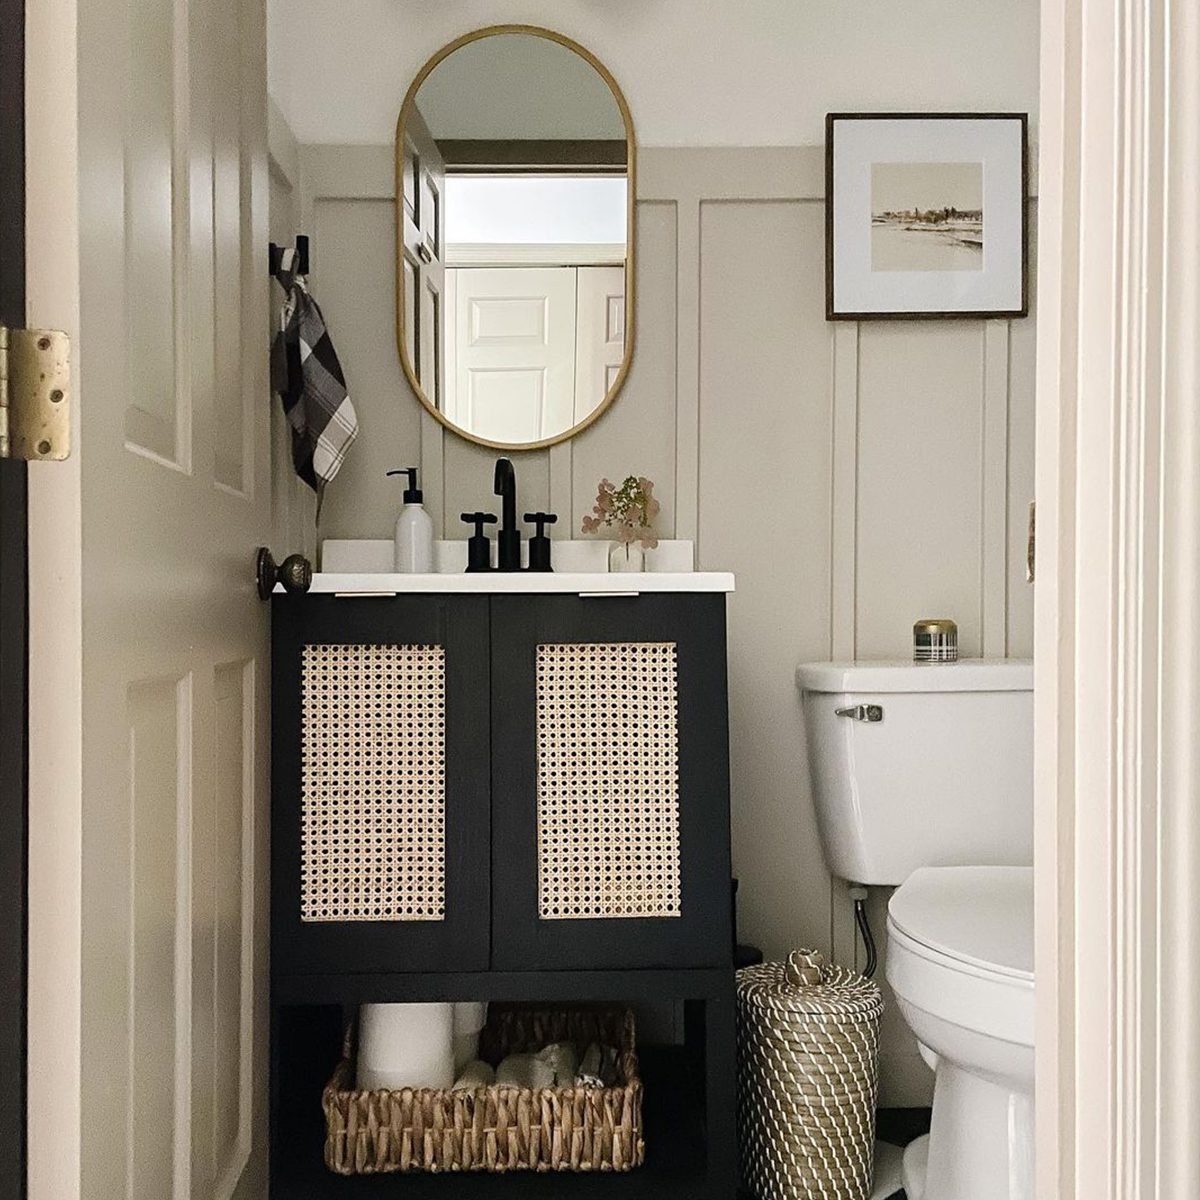 10 10 ingenious half bath decorating ideas to maximize your small space